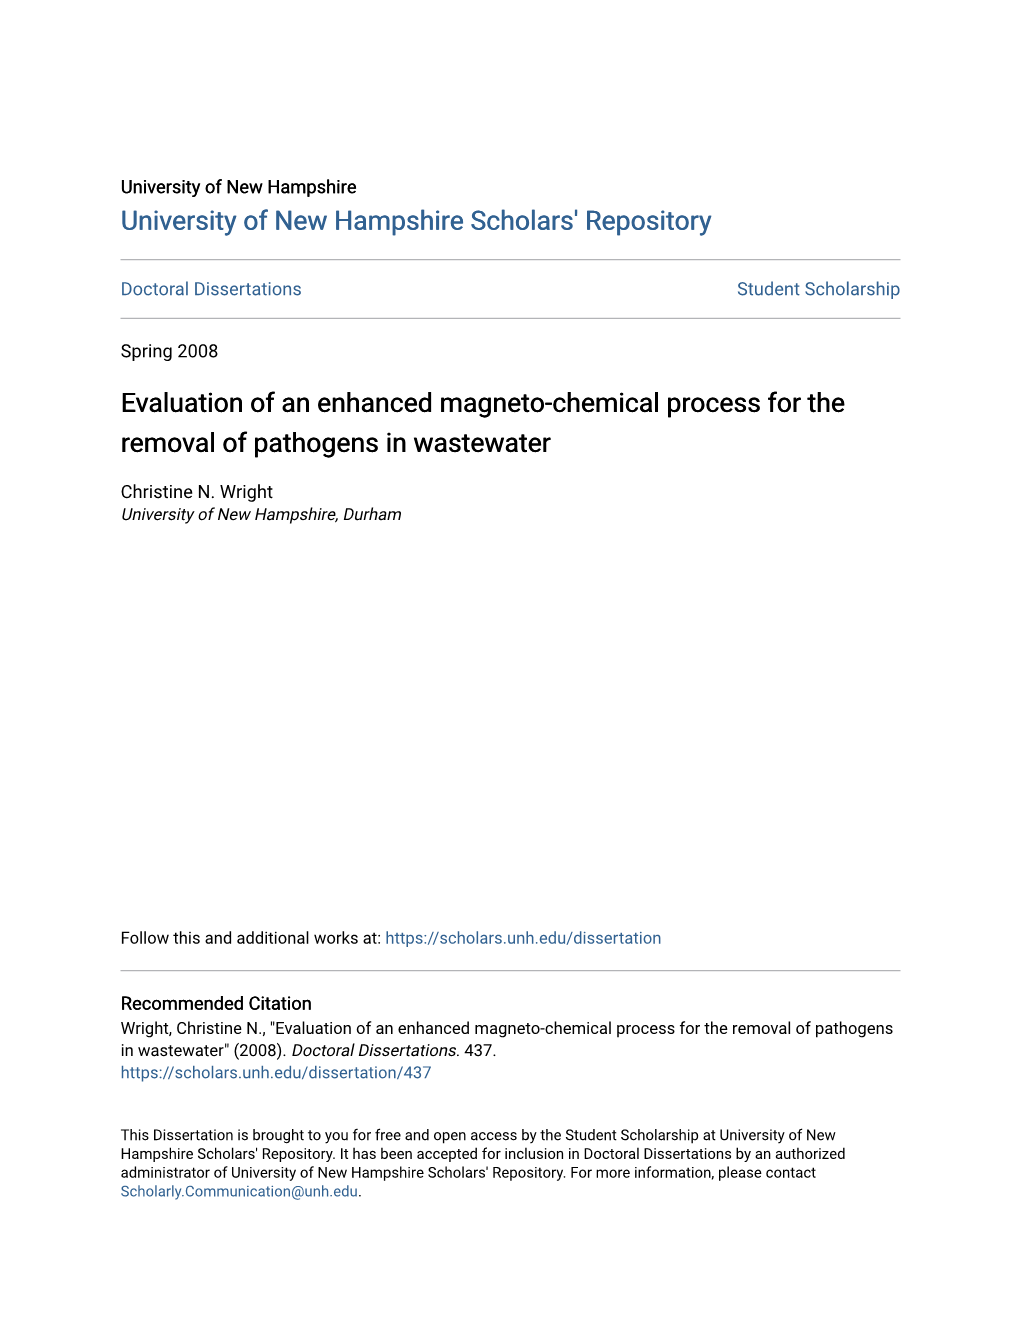 Evaluation of an Enhanced Magneto-Chemical Process for the Removal of Pathogens in Wastewater